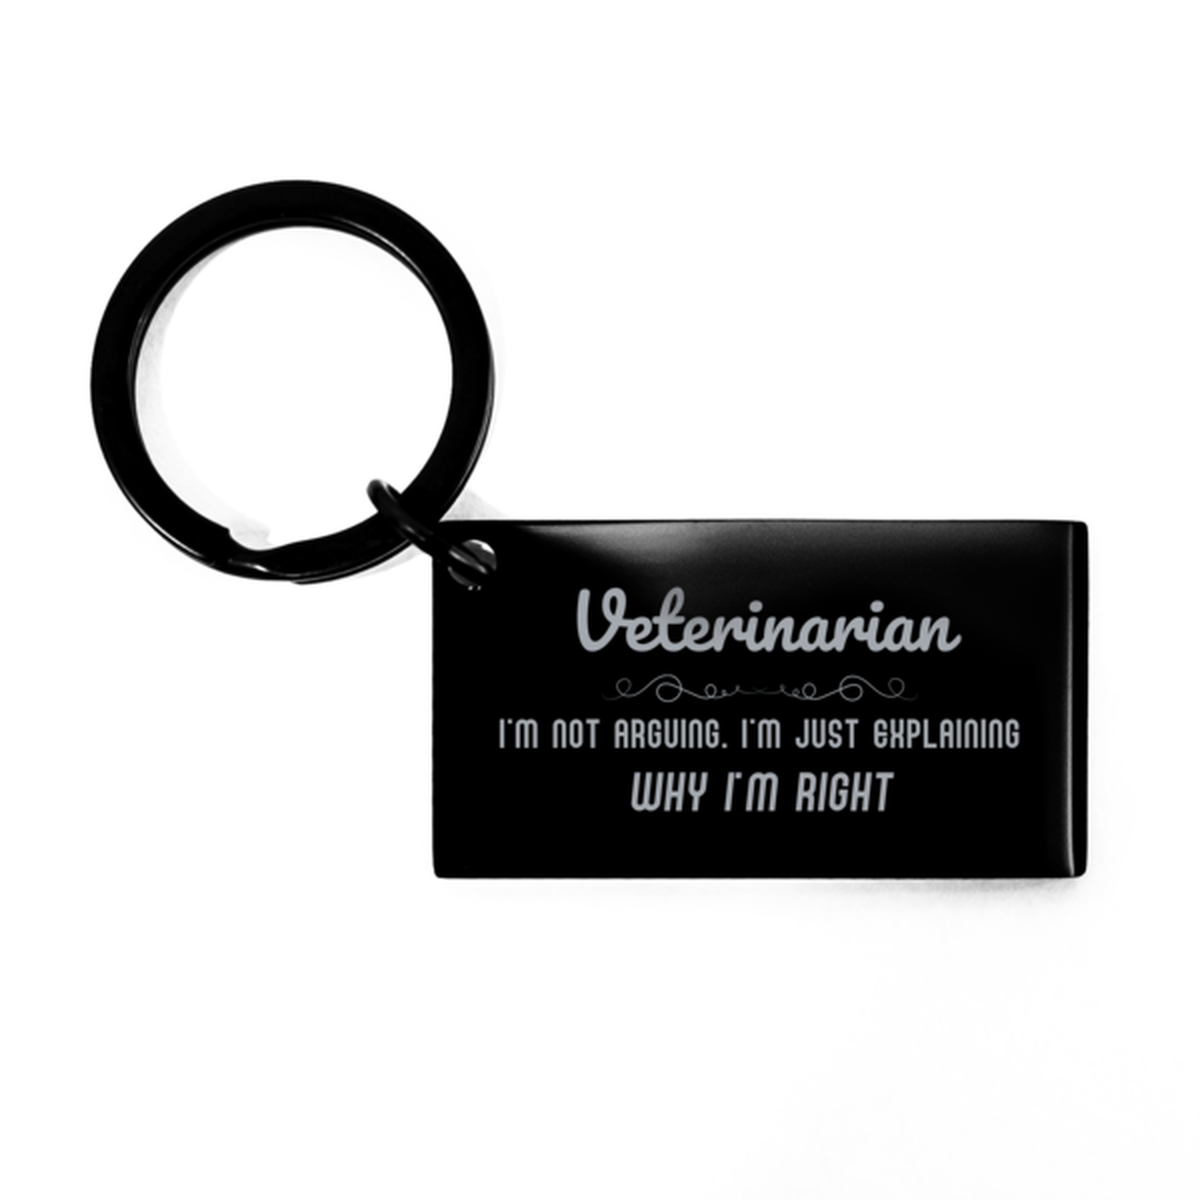 Veterinarian I'm not Arguing. I'm Just Explaining Why I'm RIGHT Keychain, Funny Saying Quote Veterinarian Gifts For Veterinarian Graduation Birthday Christmas Gifts for Men Women Coworker